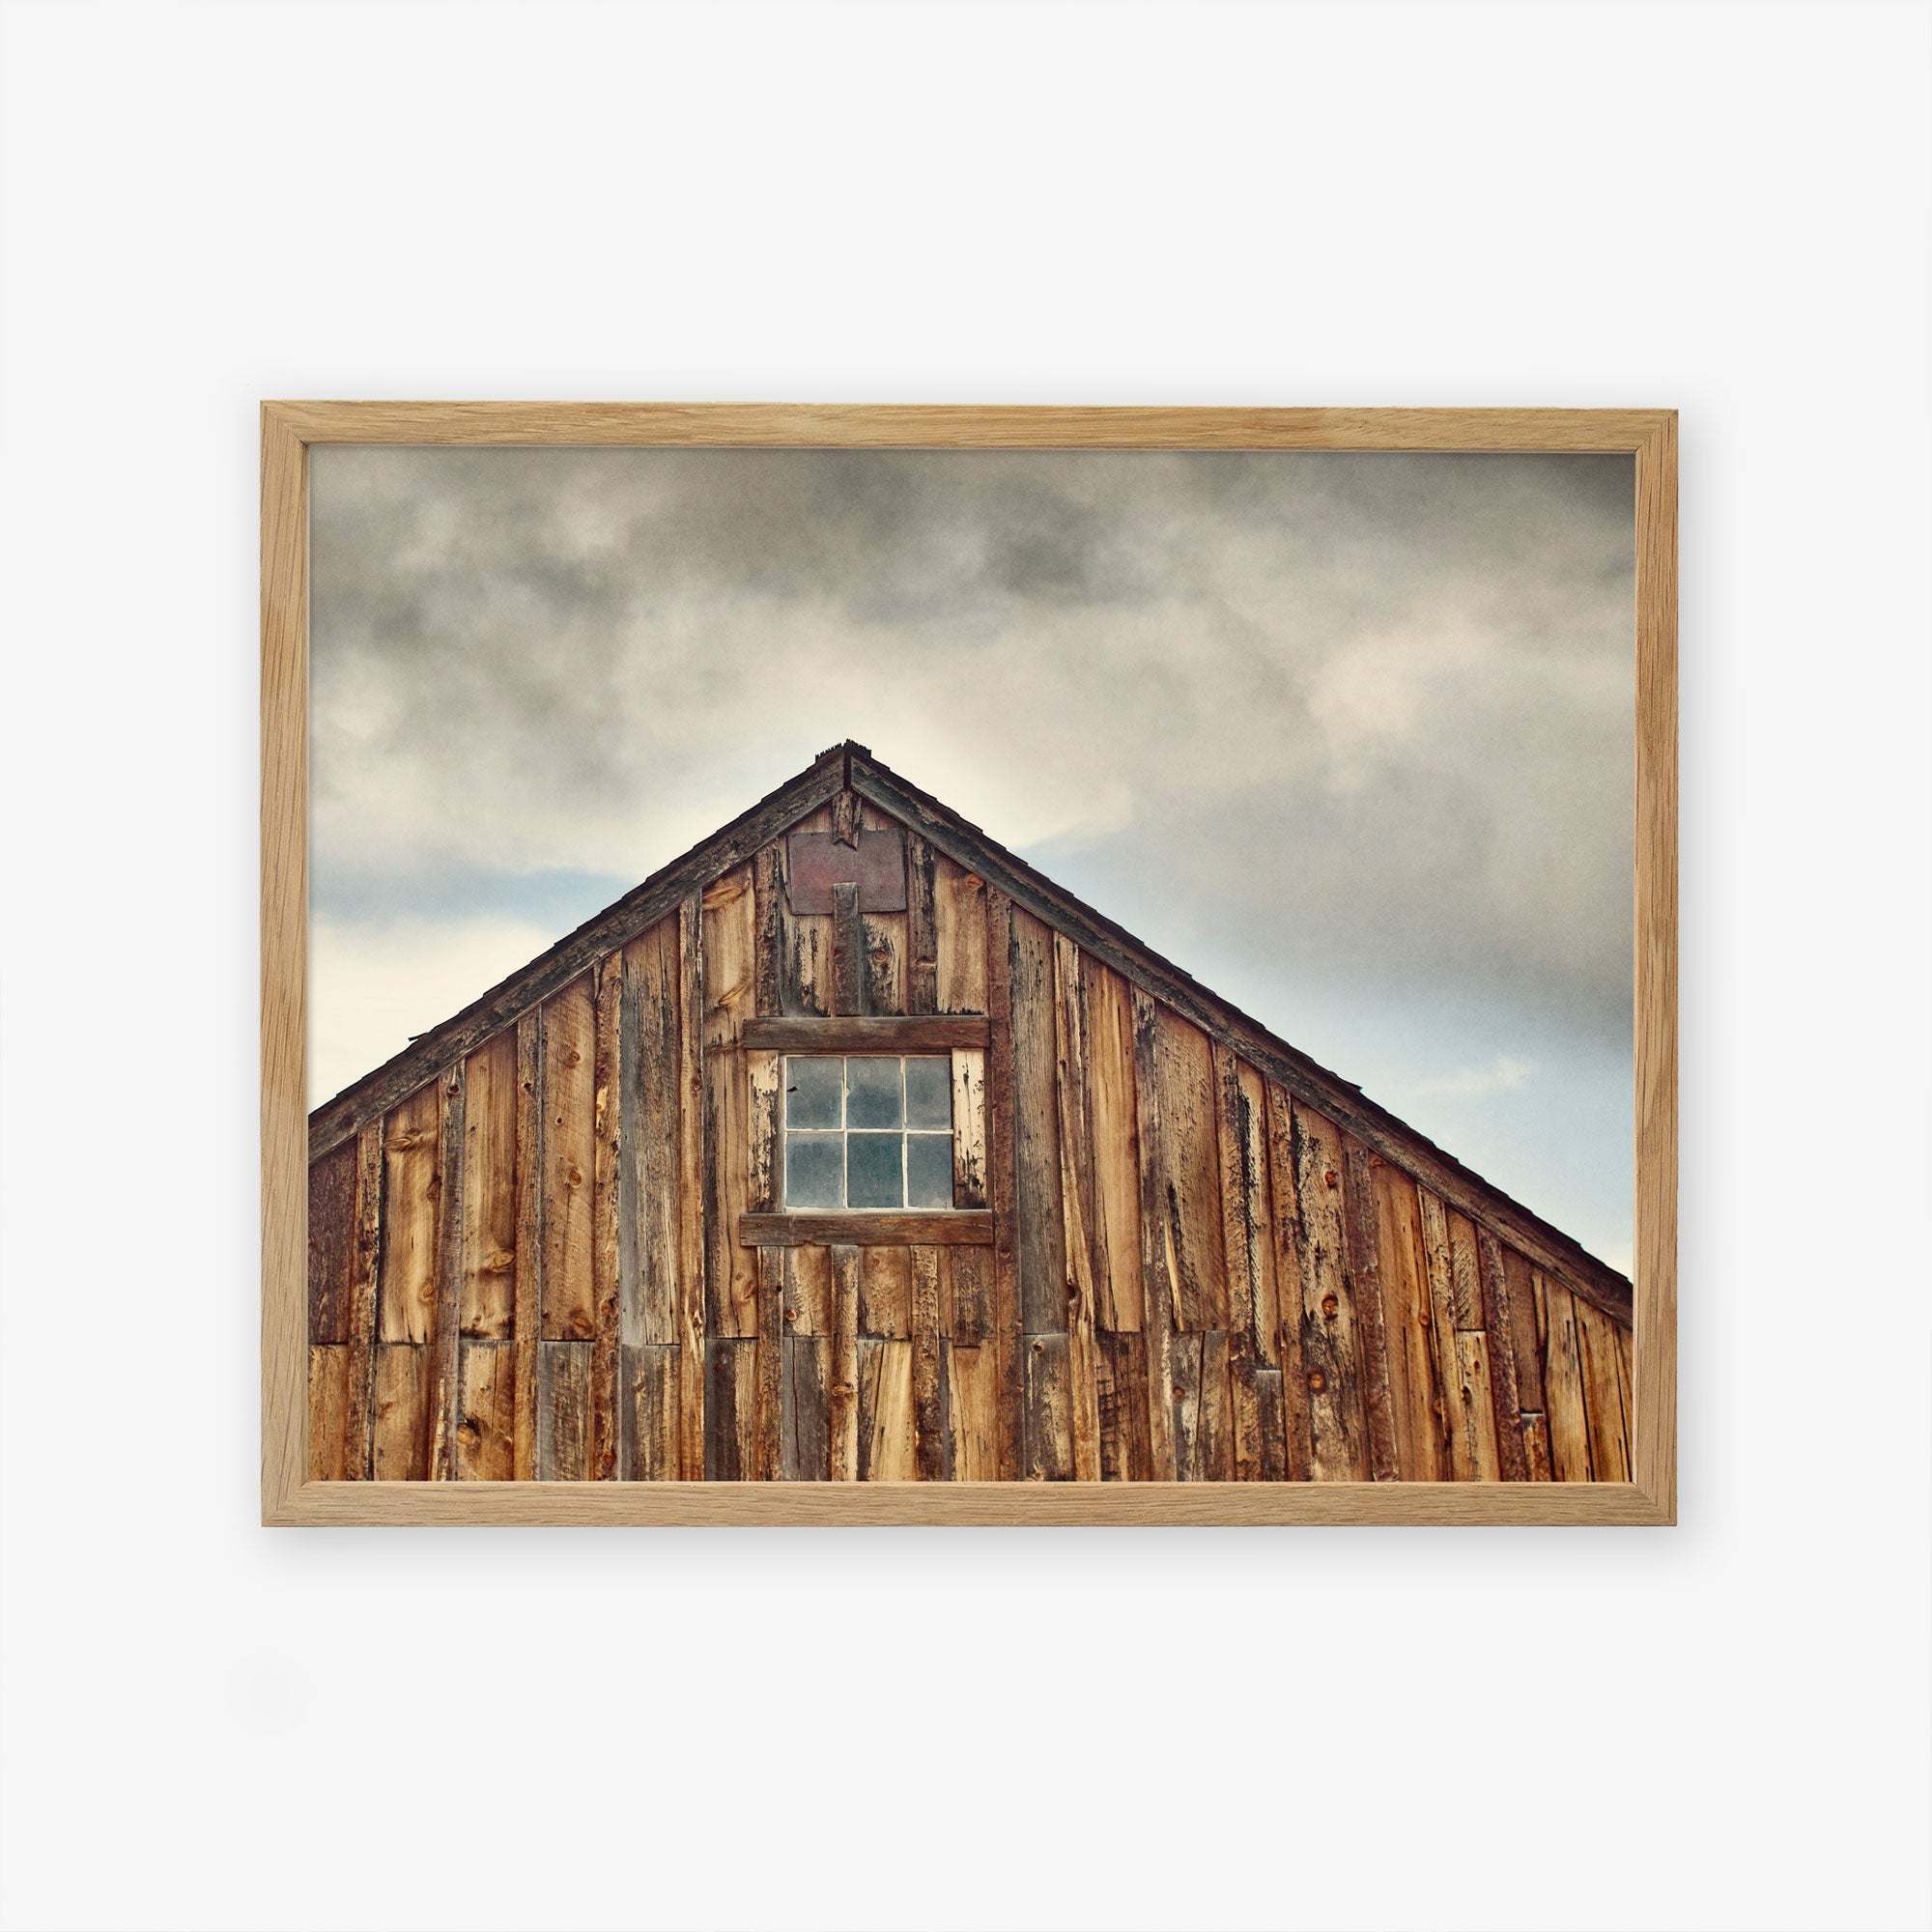 A framed Farmhouse Rustic Print of &#39;Old Barn at Bodie&#39; by Offley Green, showcasing rustic textures and a single centered window, printed on archival photographic paper.